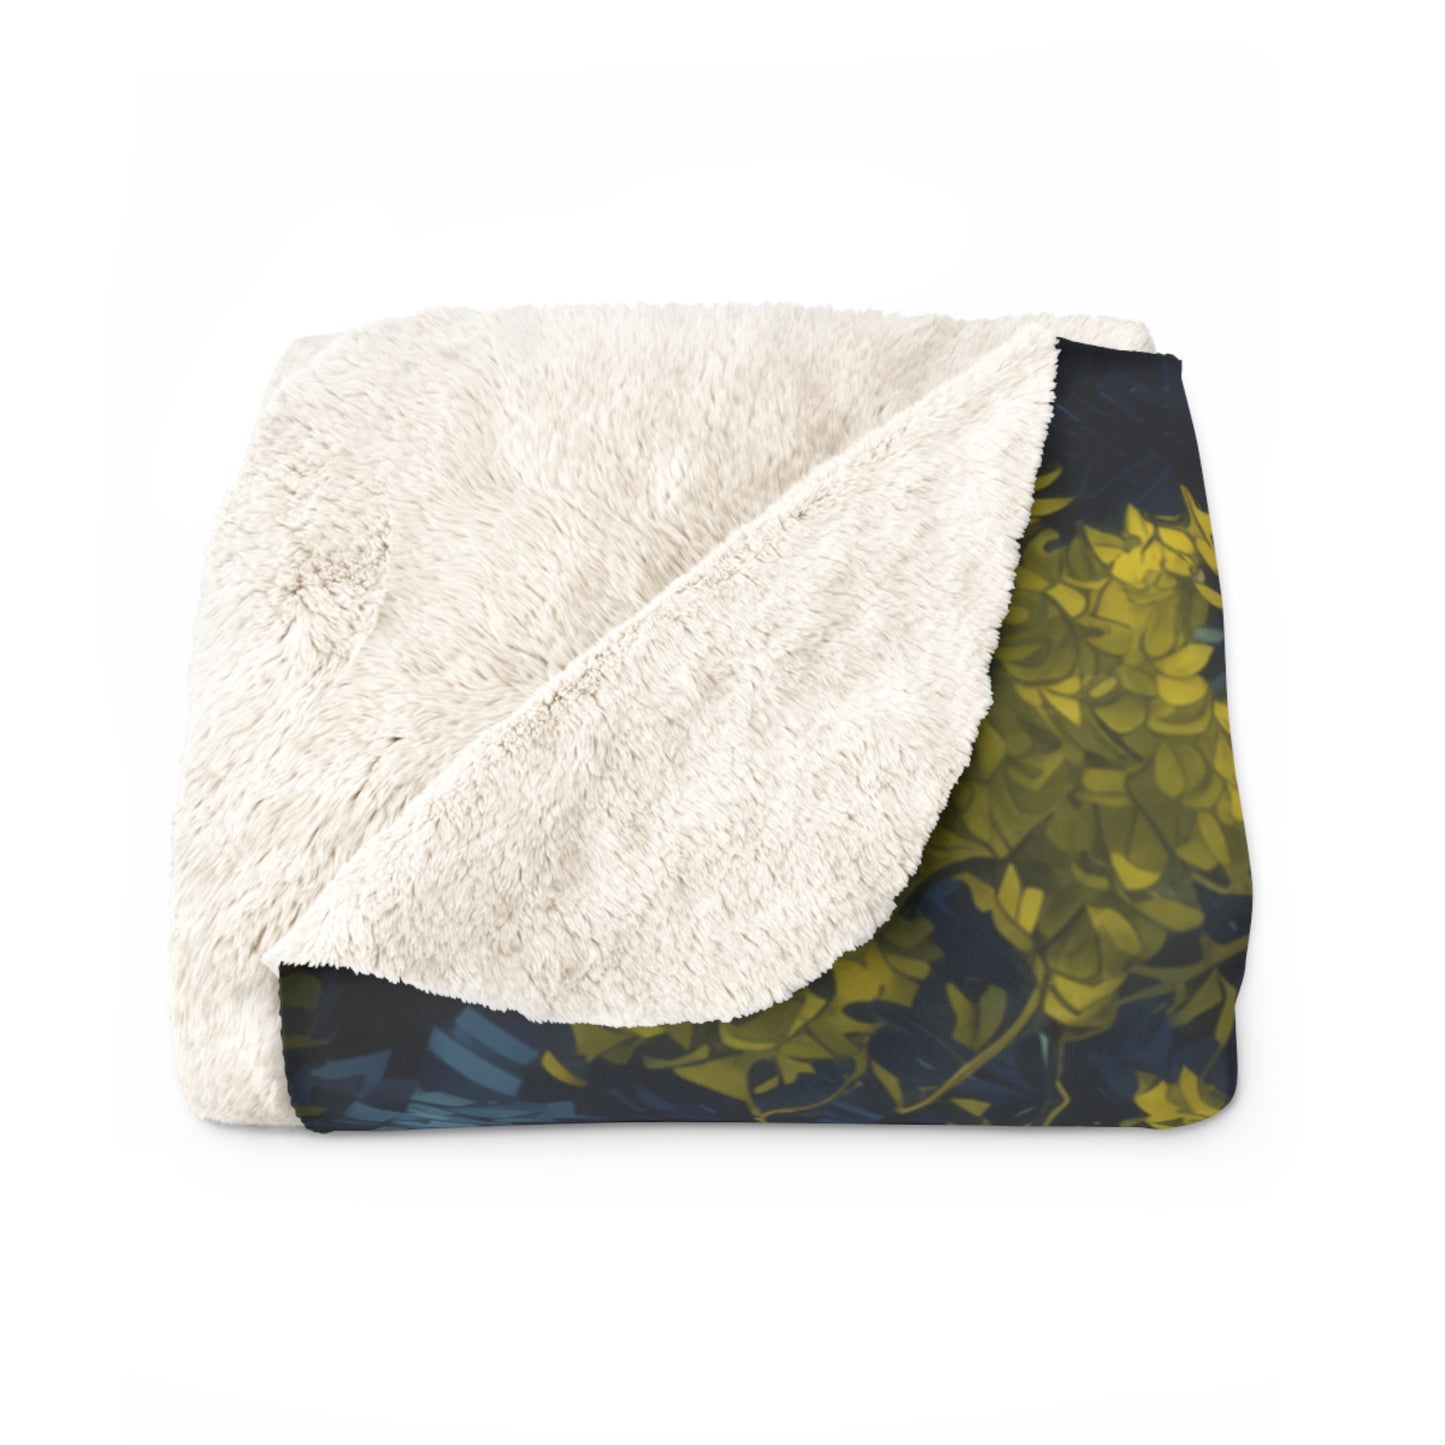 Everglades National Park Sherpa Blanket - The Starry Night